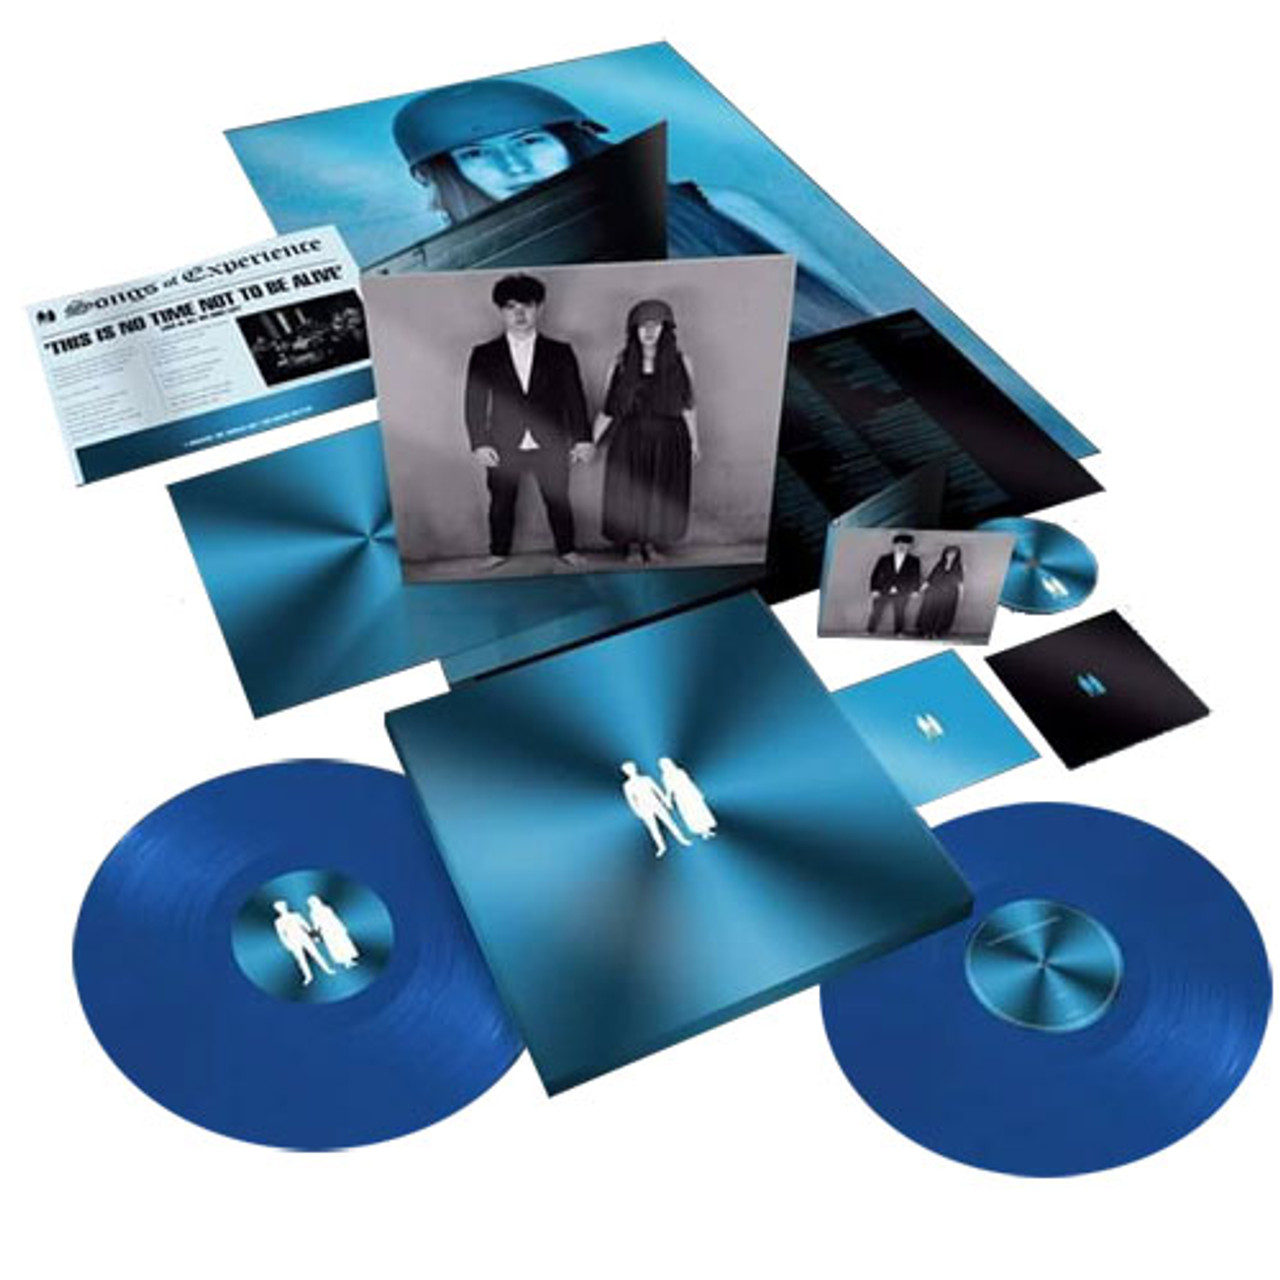 U2 - Songs Of Experience (Deluxe Cyan Blue Translucent Double Vinyl + CD)